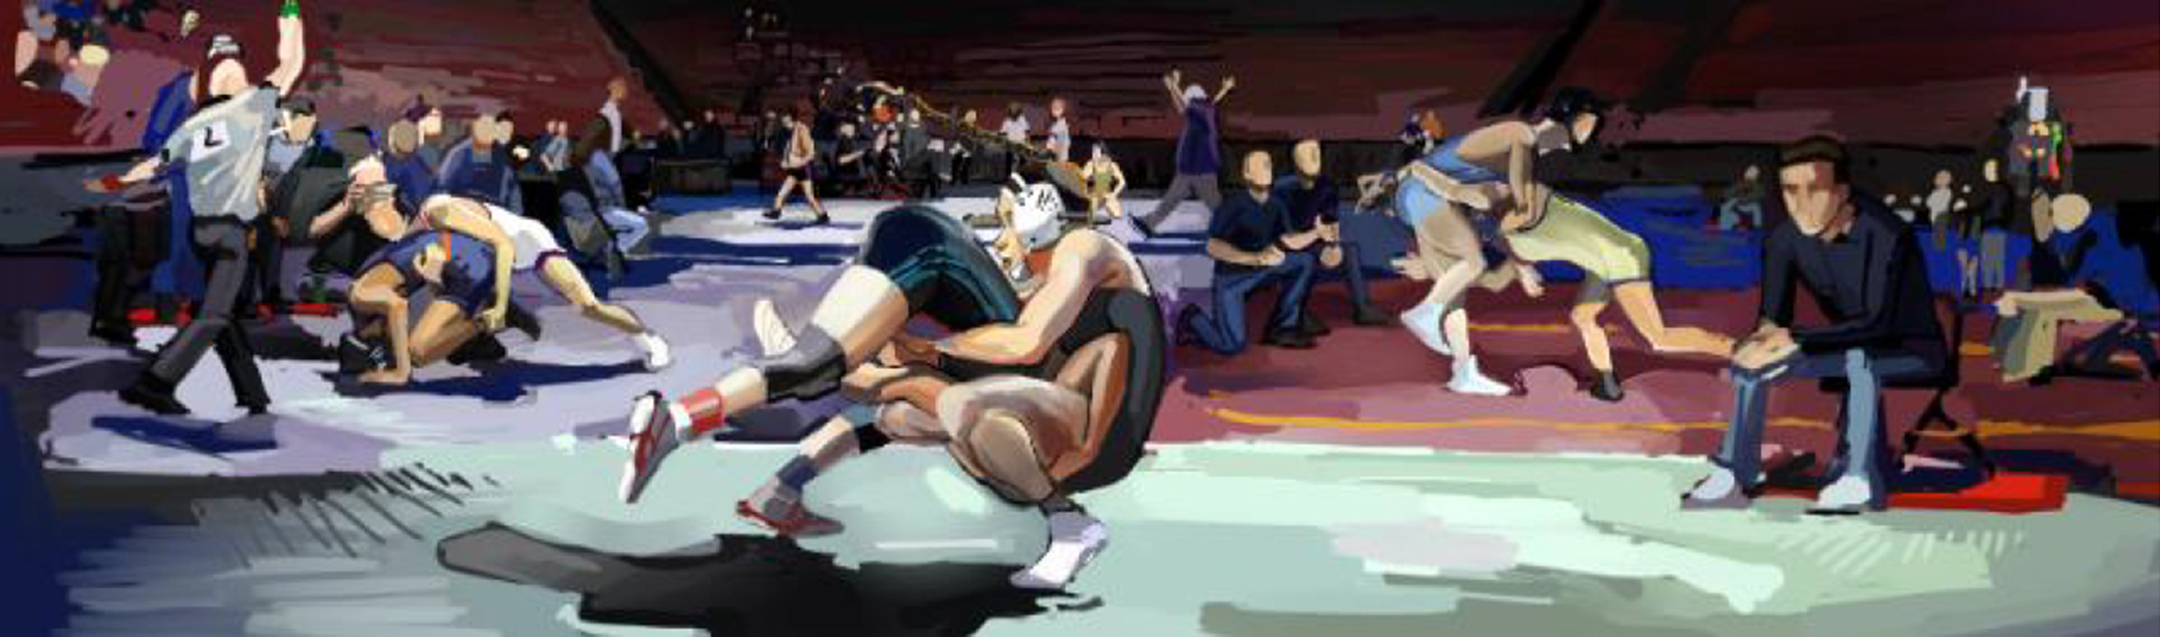 Illustration of a wrestling match with multiple bouts happening at once